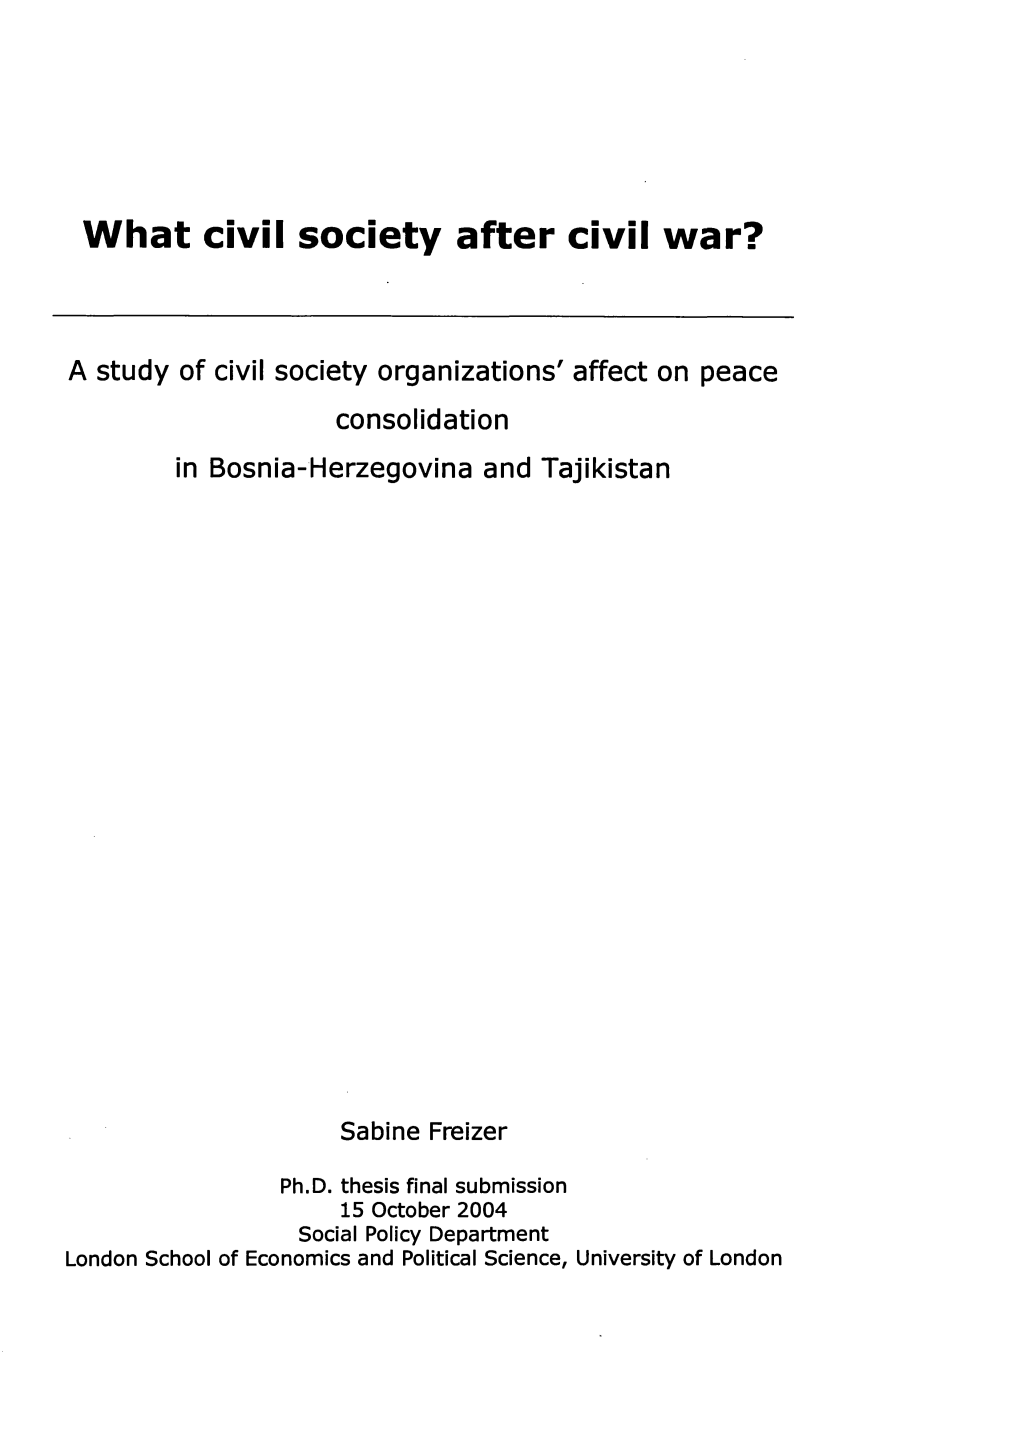 What Civil Society After Civil War?